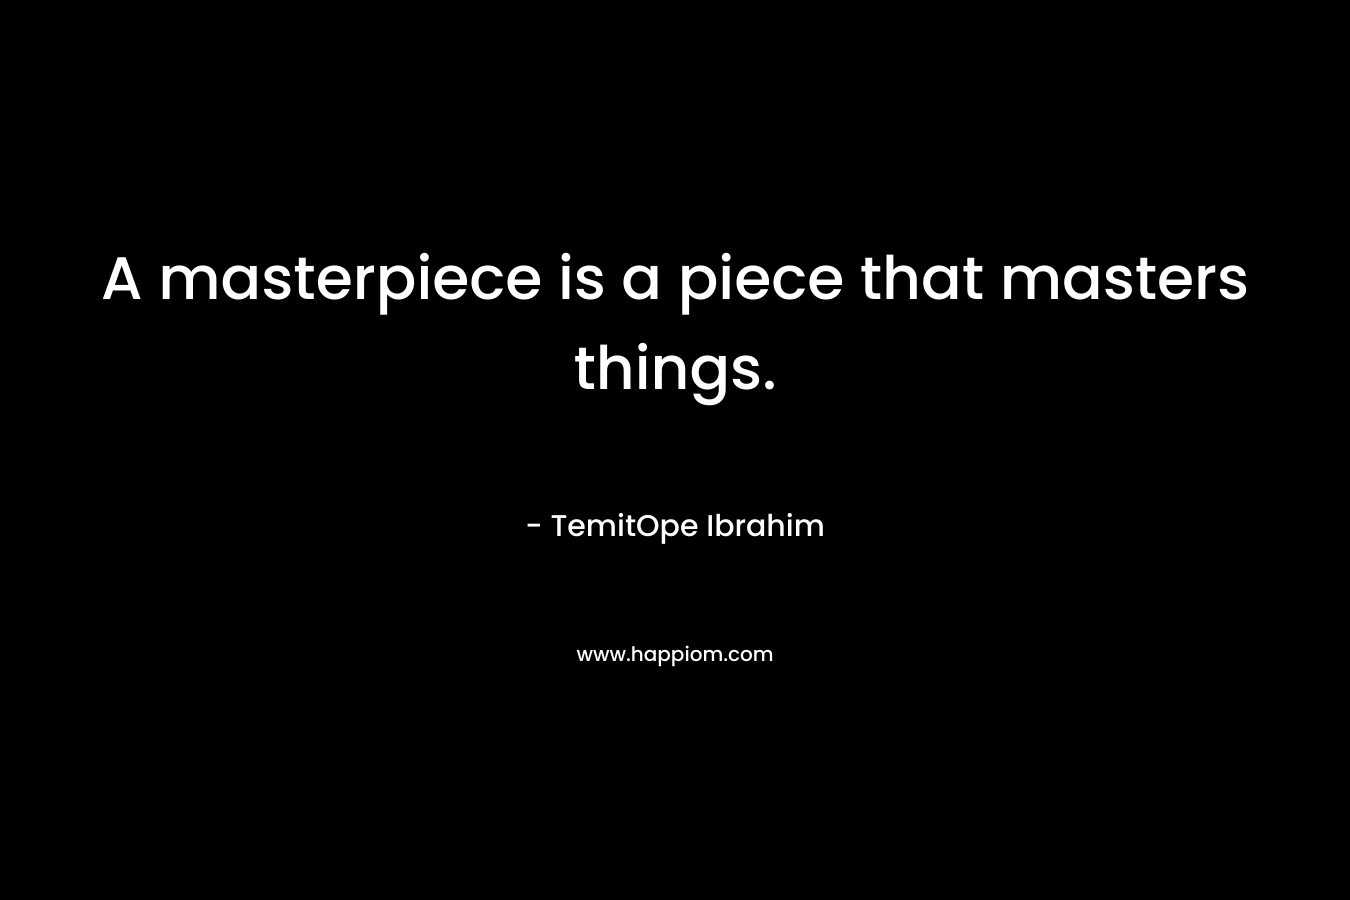 A masterpiece is a piece that masters things.